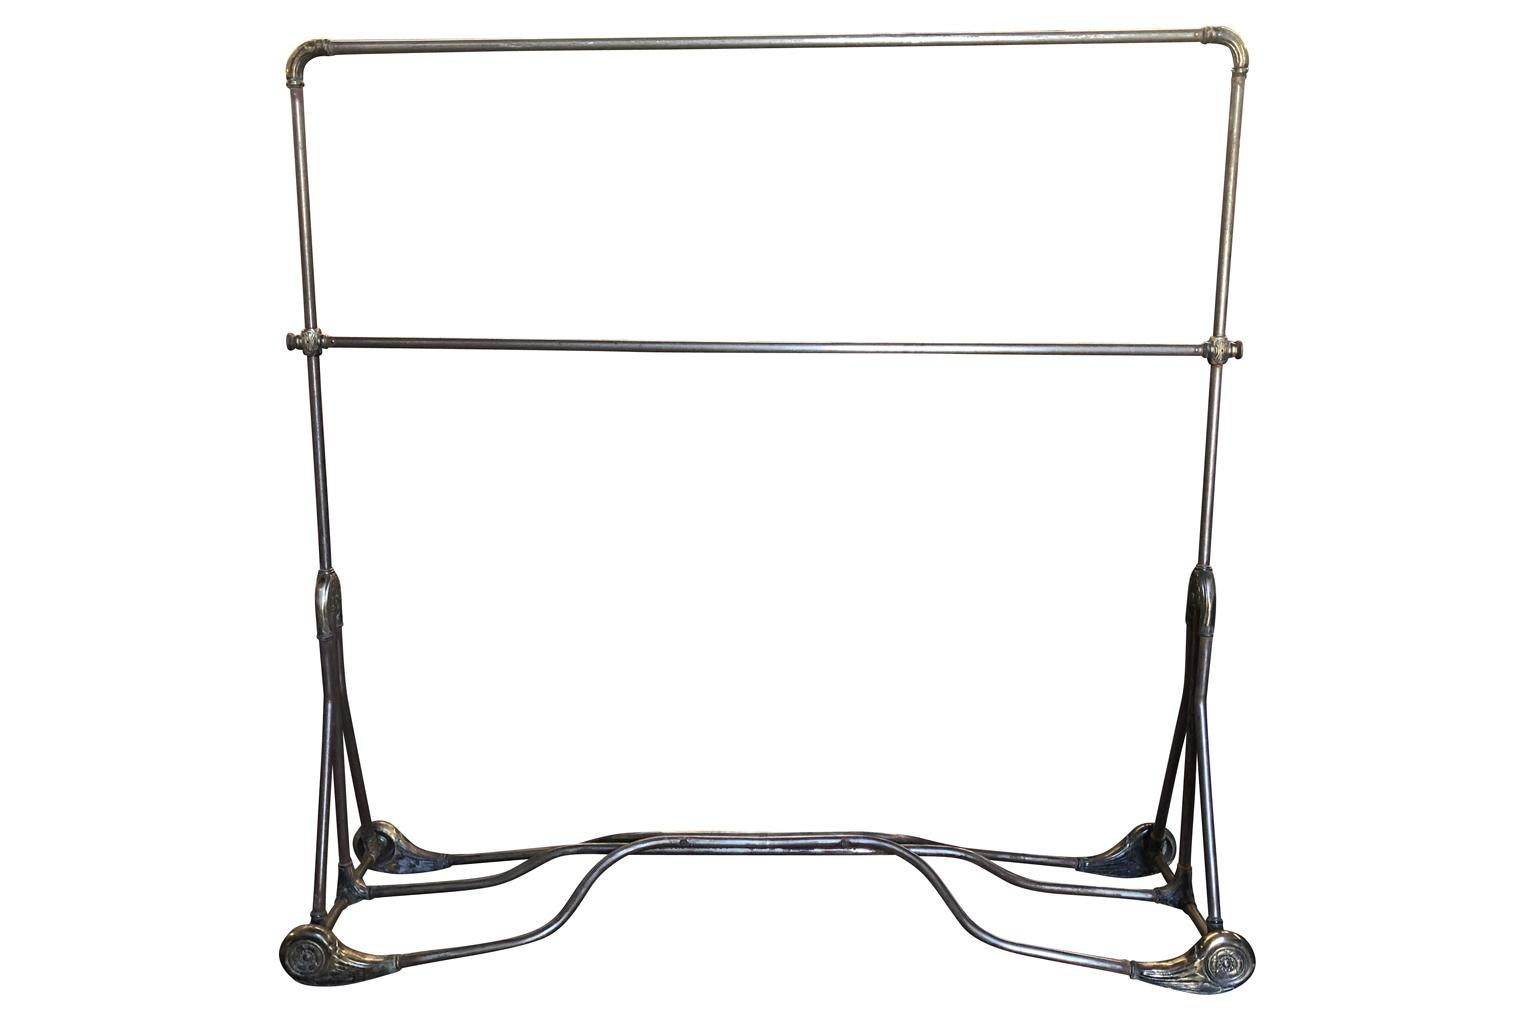 An exceptional and rare late 19th-early 20th century Porte Manteau, coat rack, garment rack from Barcelona. A sensational piece - soundly constructed from metal in the Art Nouveau style. Perfect for a loft foyer, large master closet, restaurant or